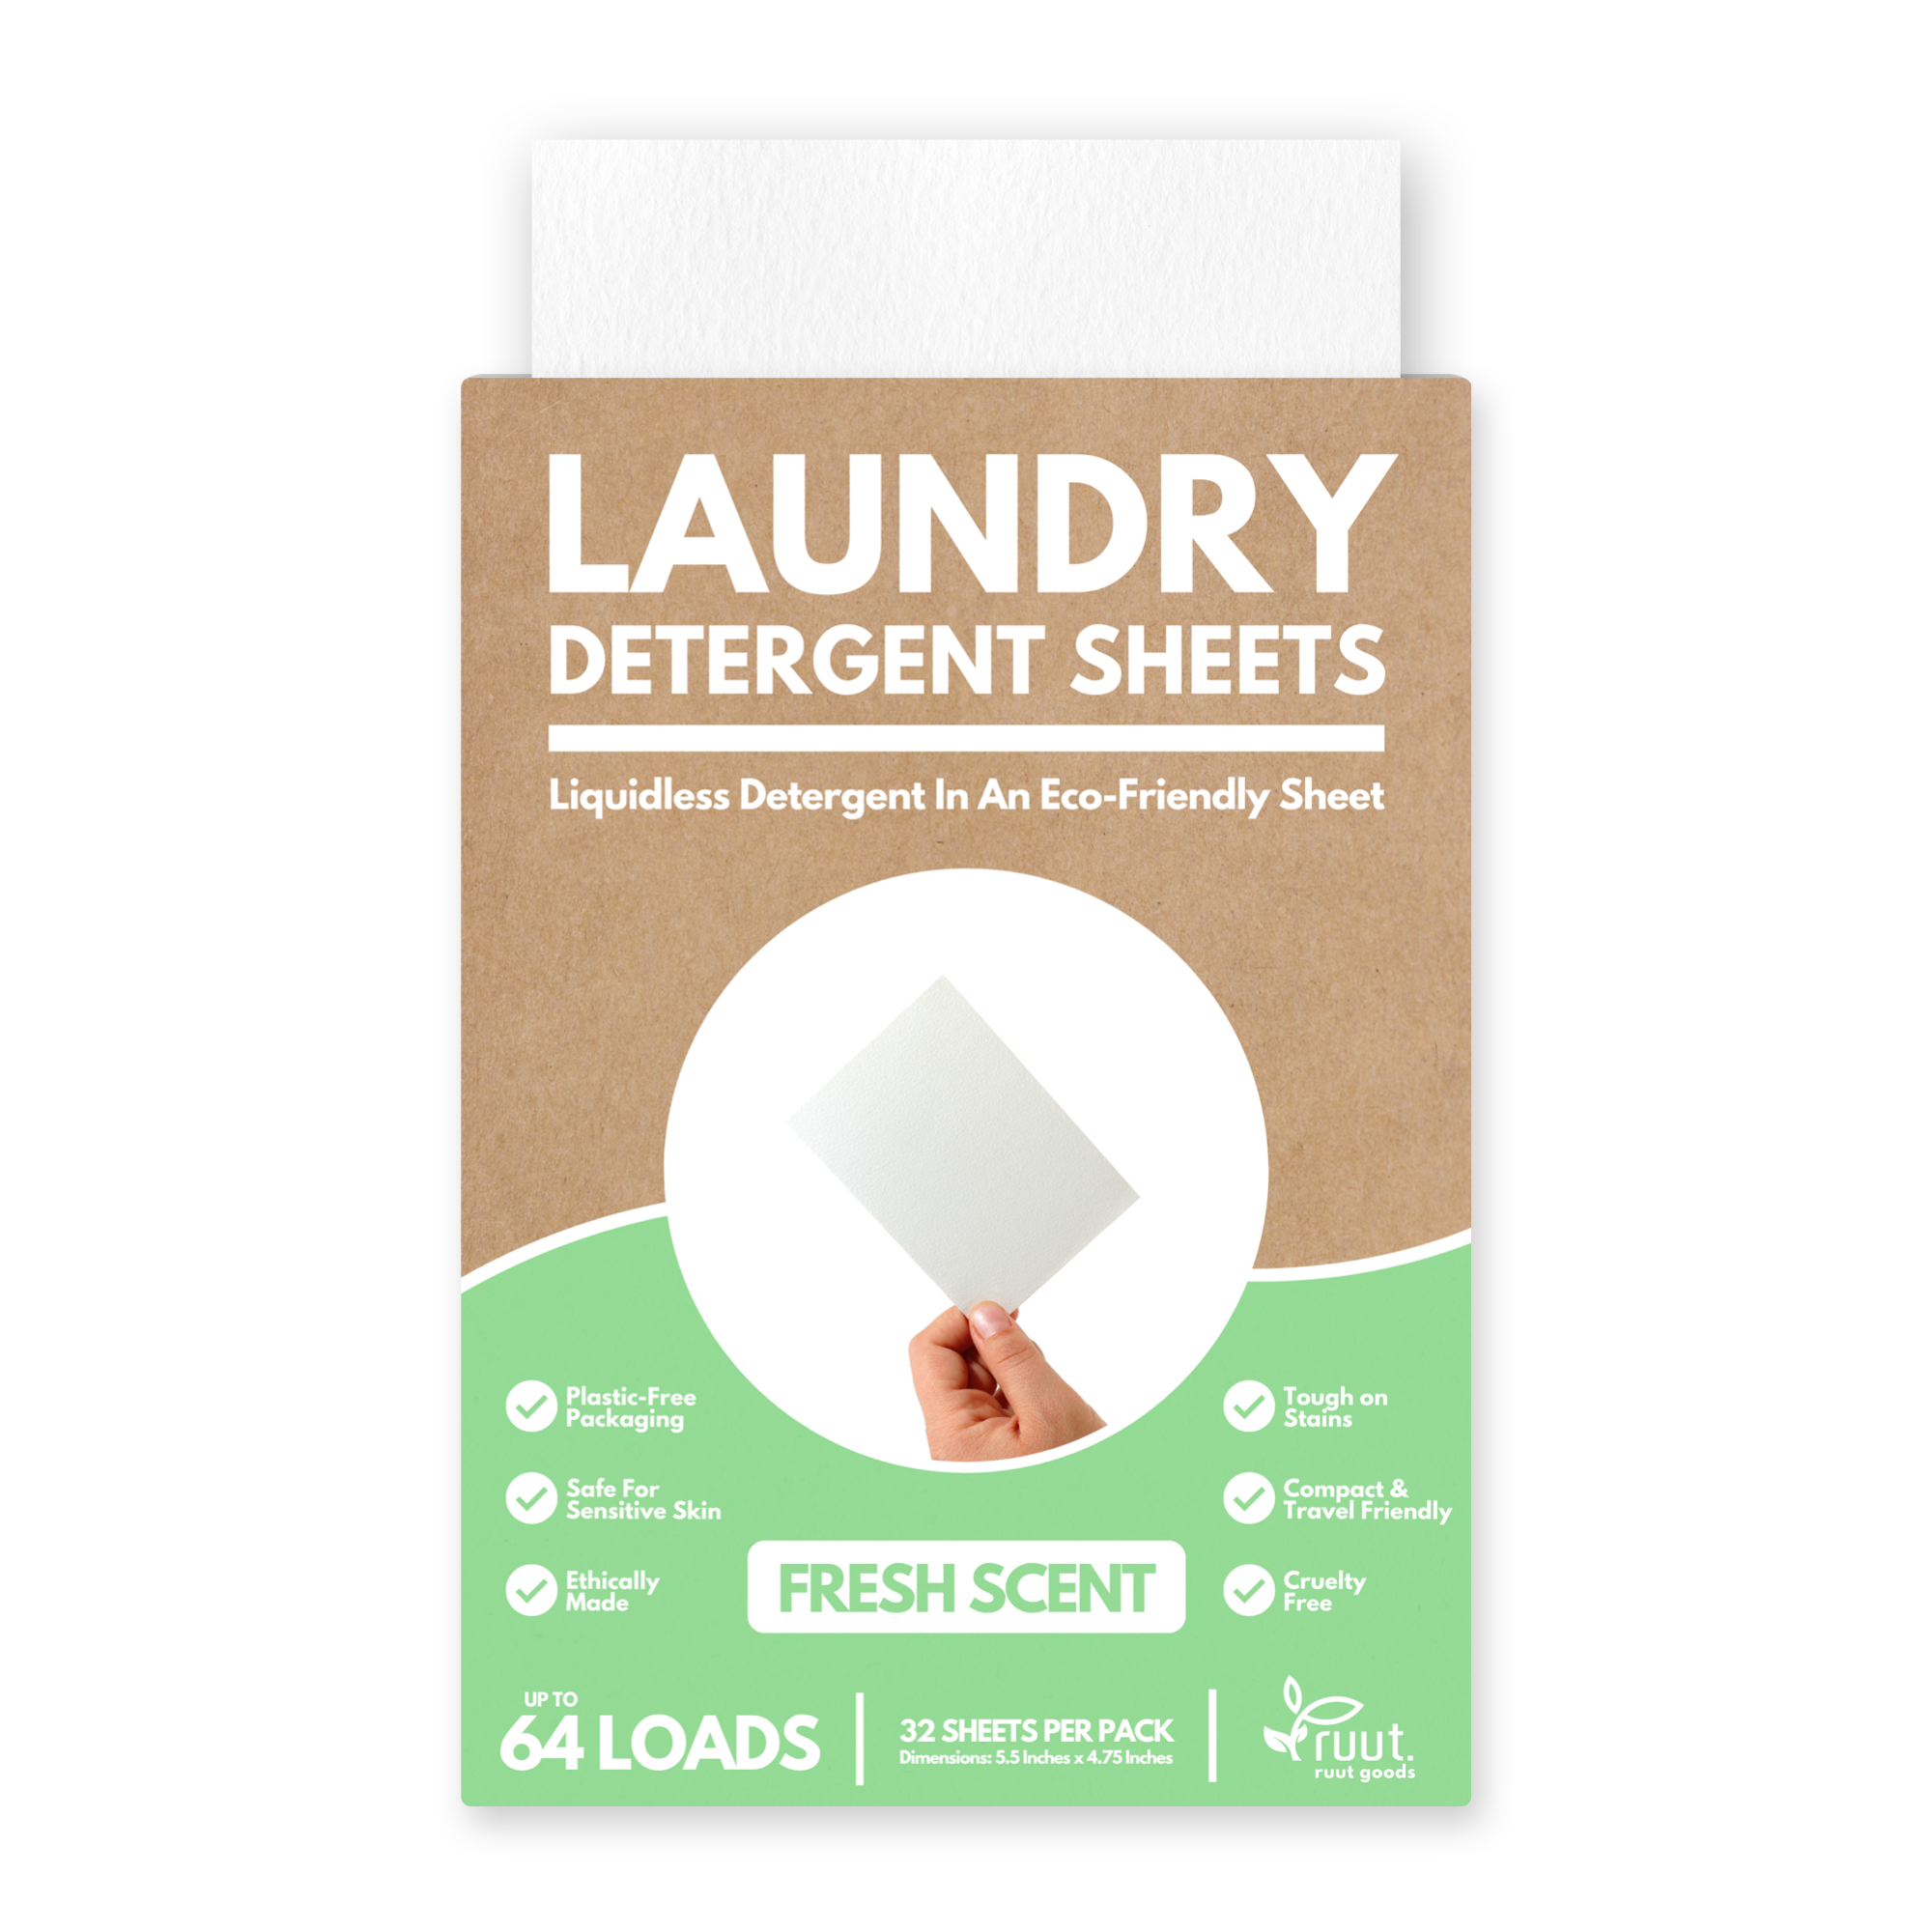 The future of eco-friendly laundry detergent is in dissolvable sheets